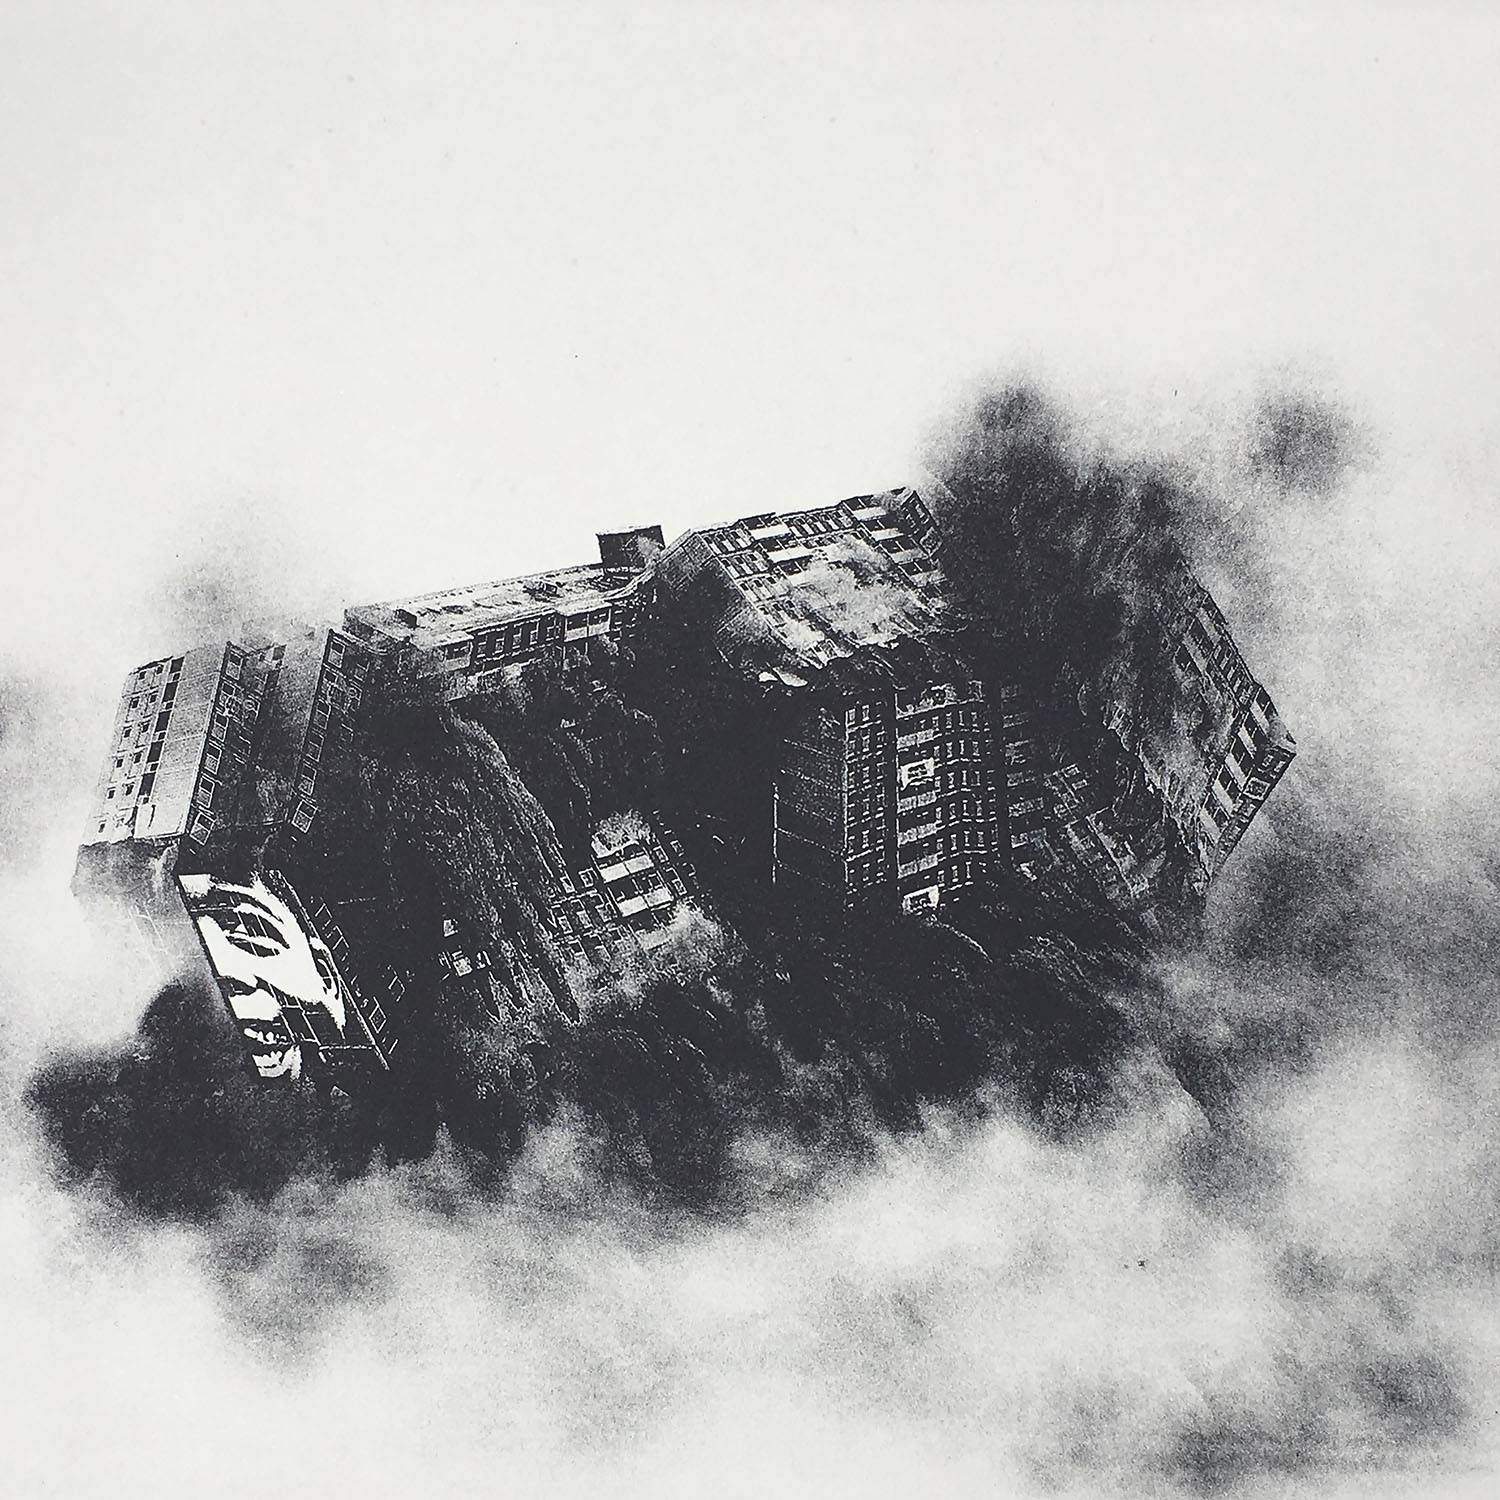 Student work: abstracted archtectural forms in a hazy grey cloud